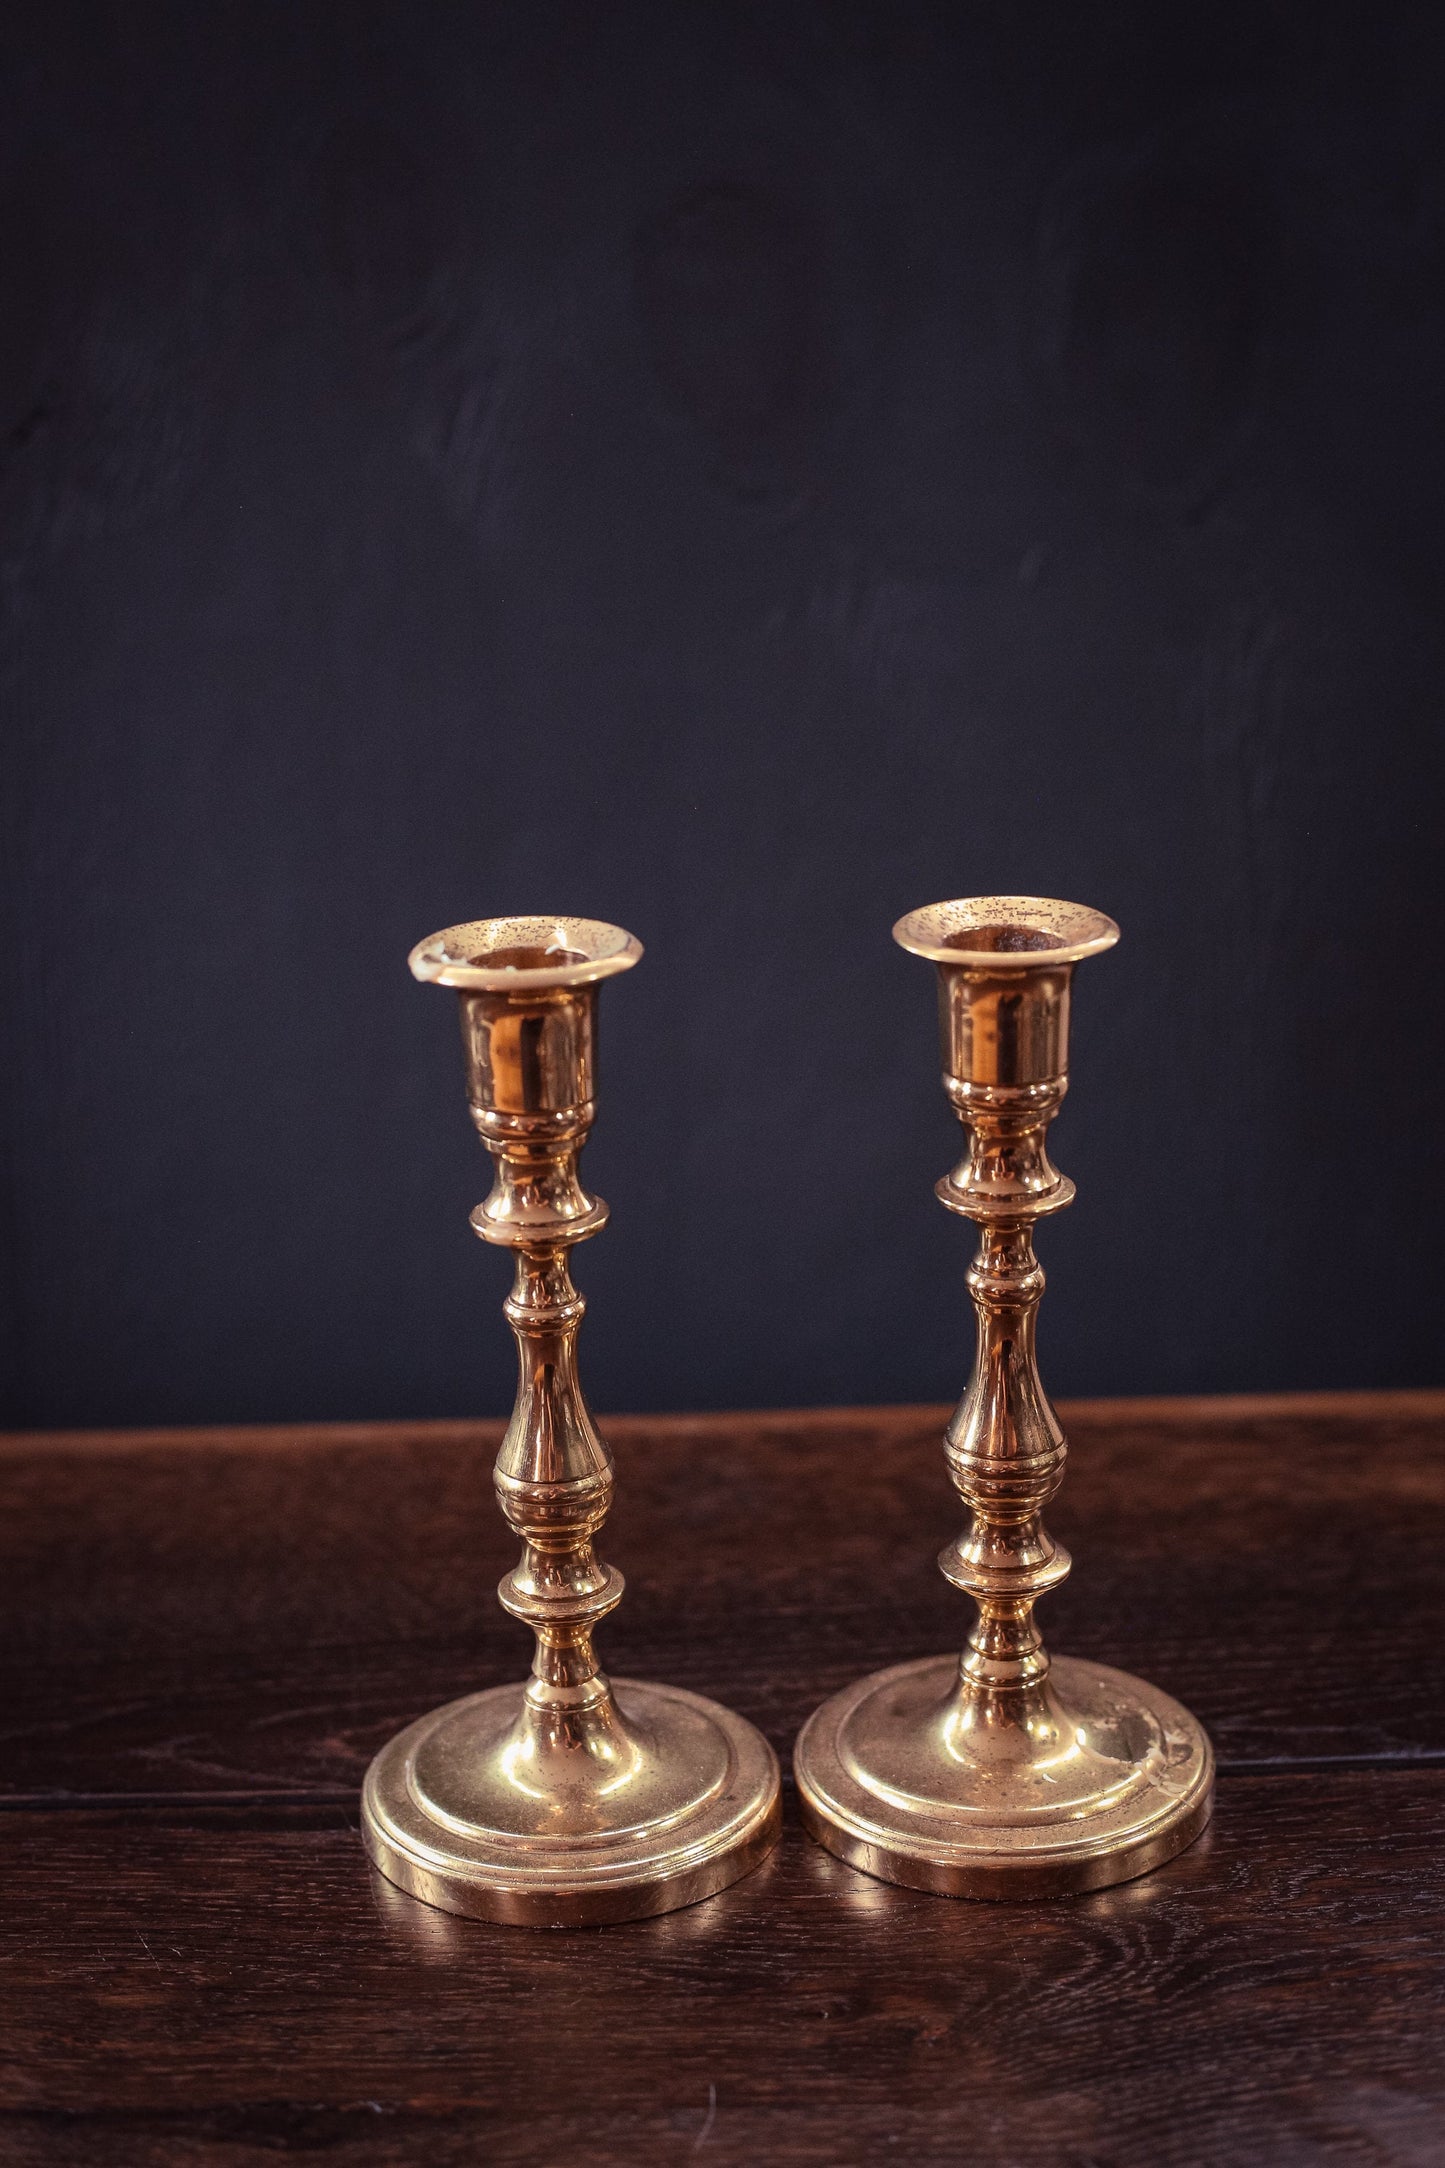 Pair of Solid Brass Candle Holders - Vintage Midcentury Modern Brass Candle Base